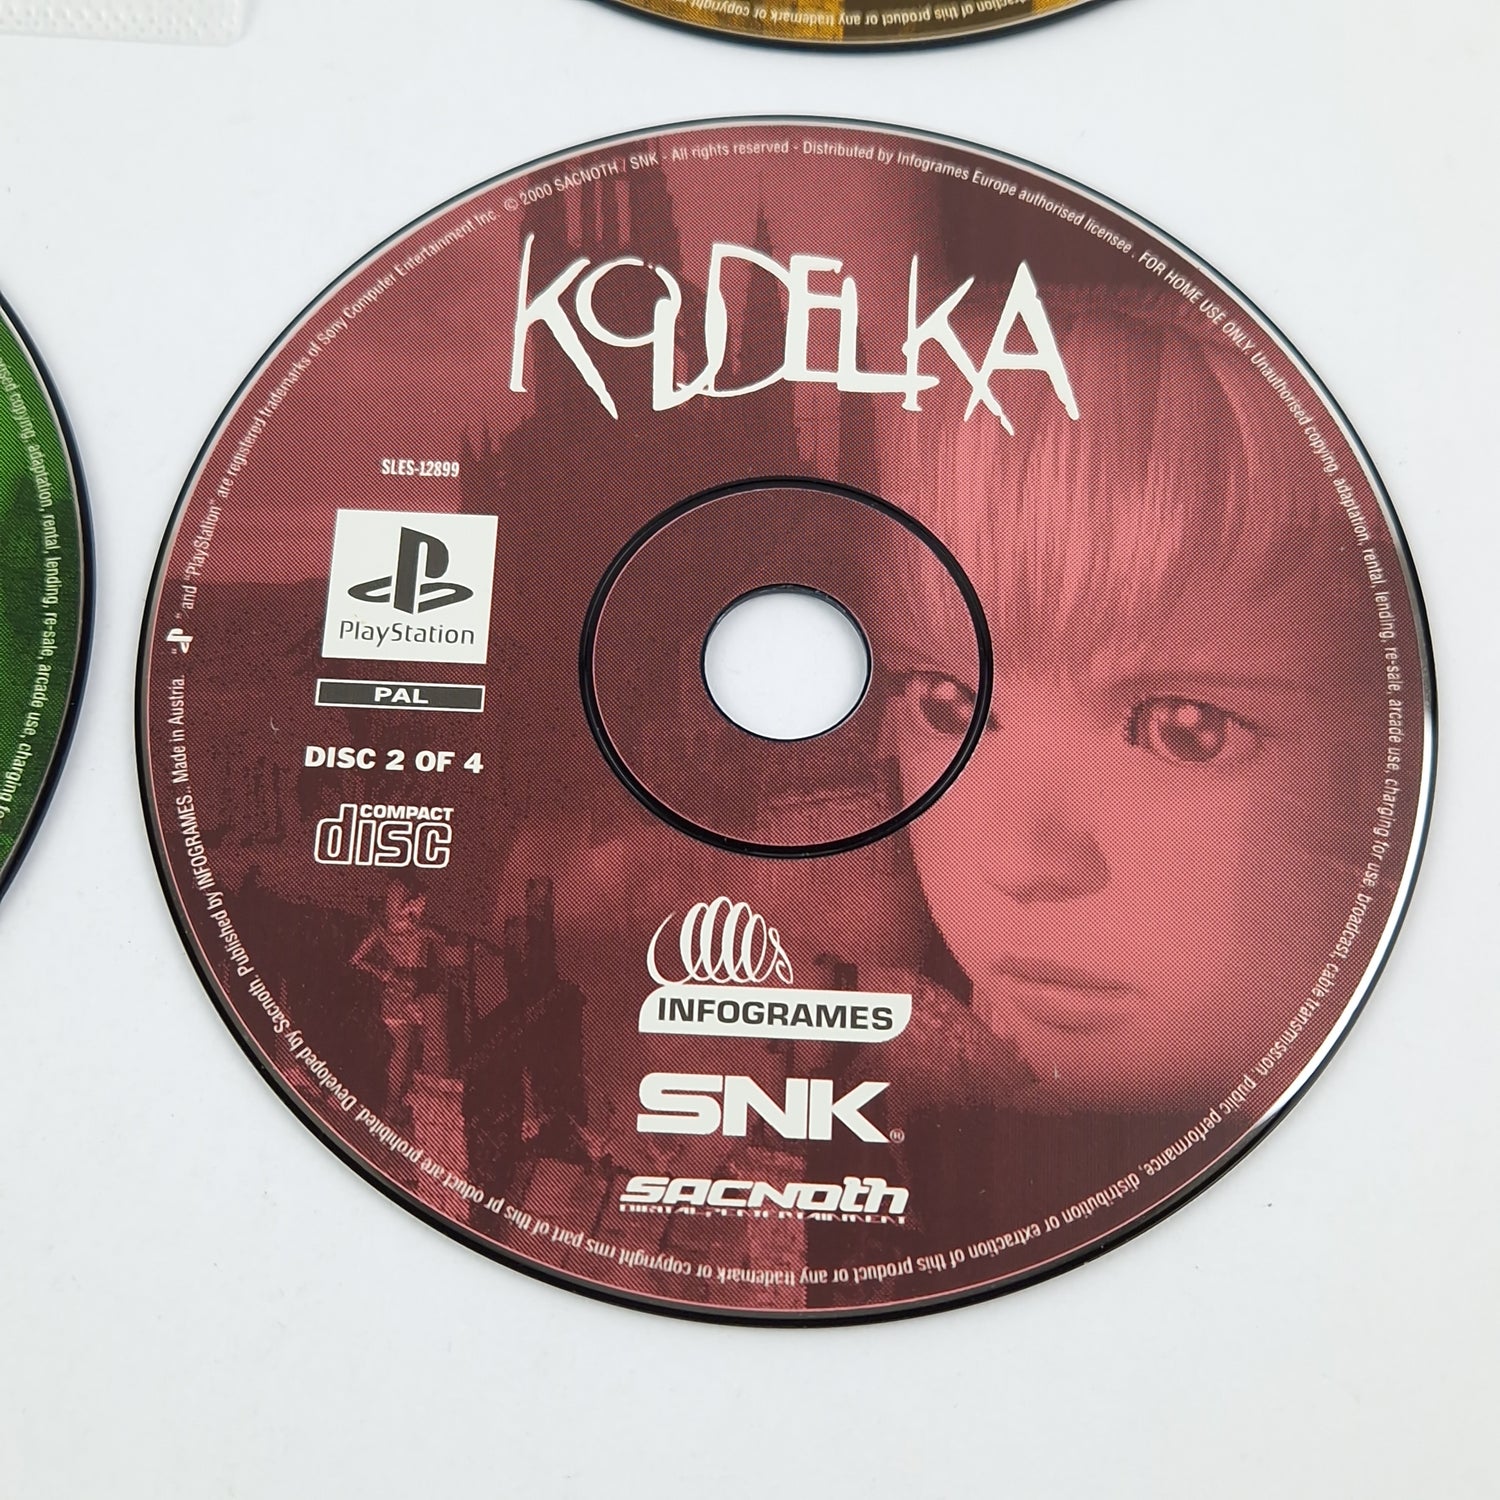 Playstation 1 game: Koudelka - CDs with instructions without original packaging / PS1